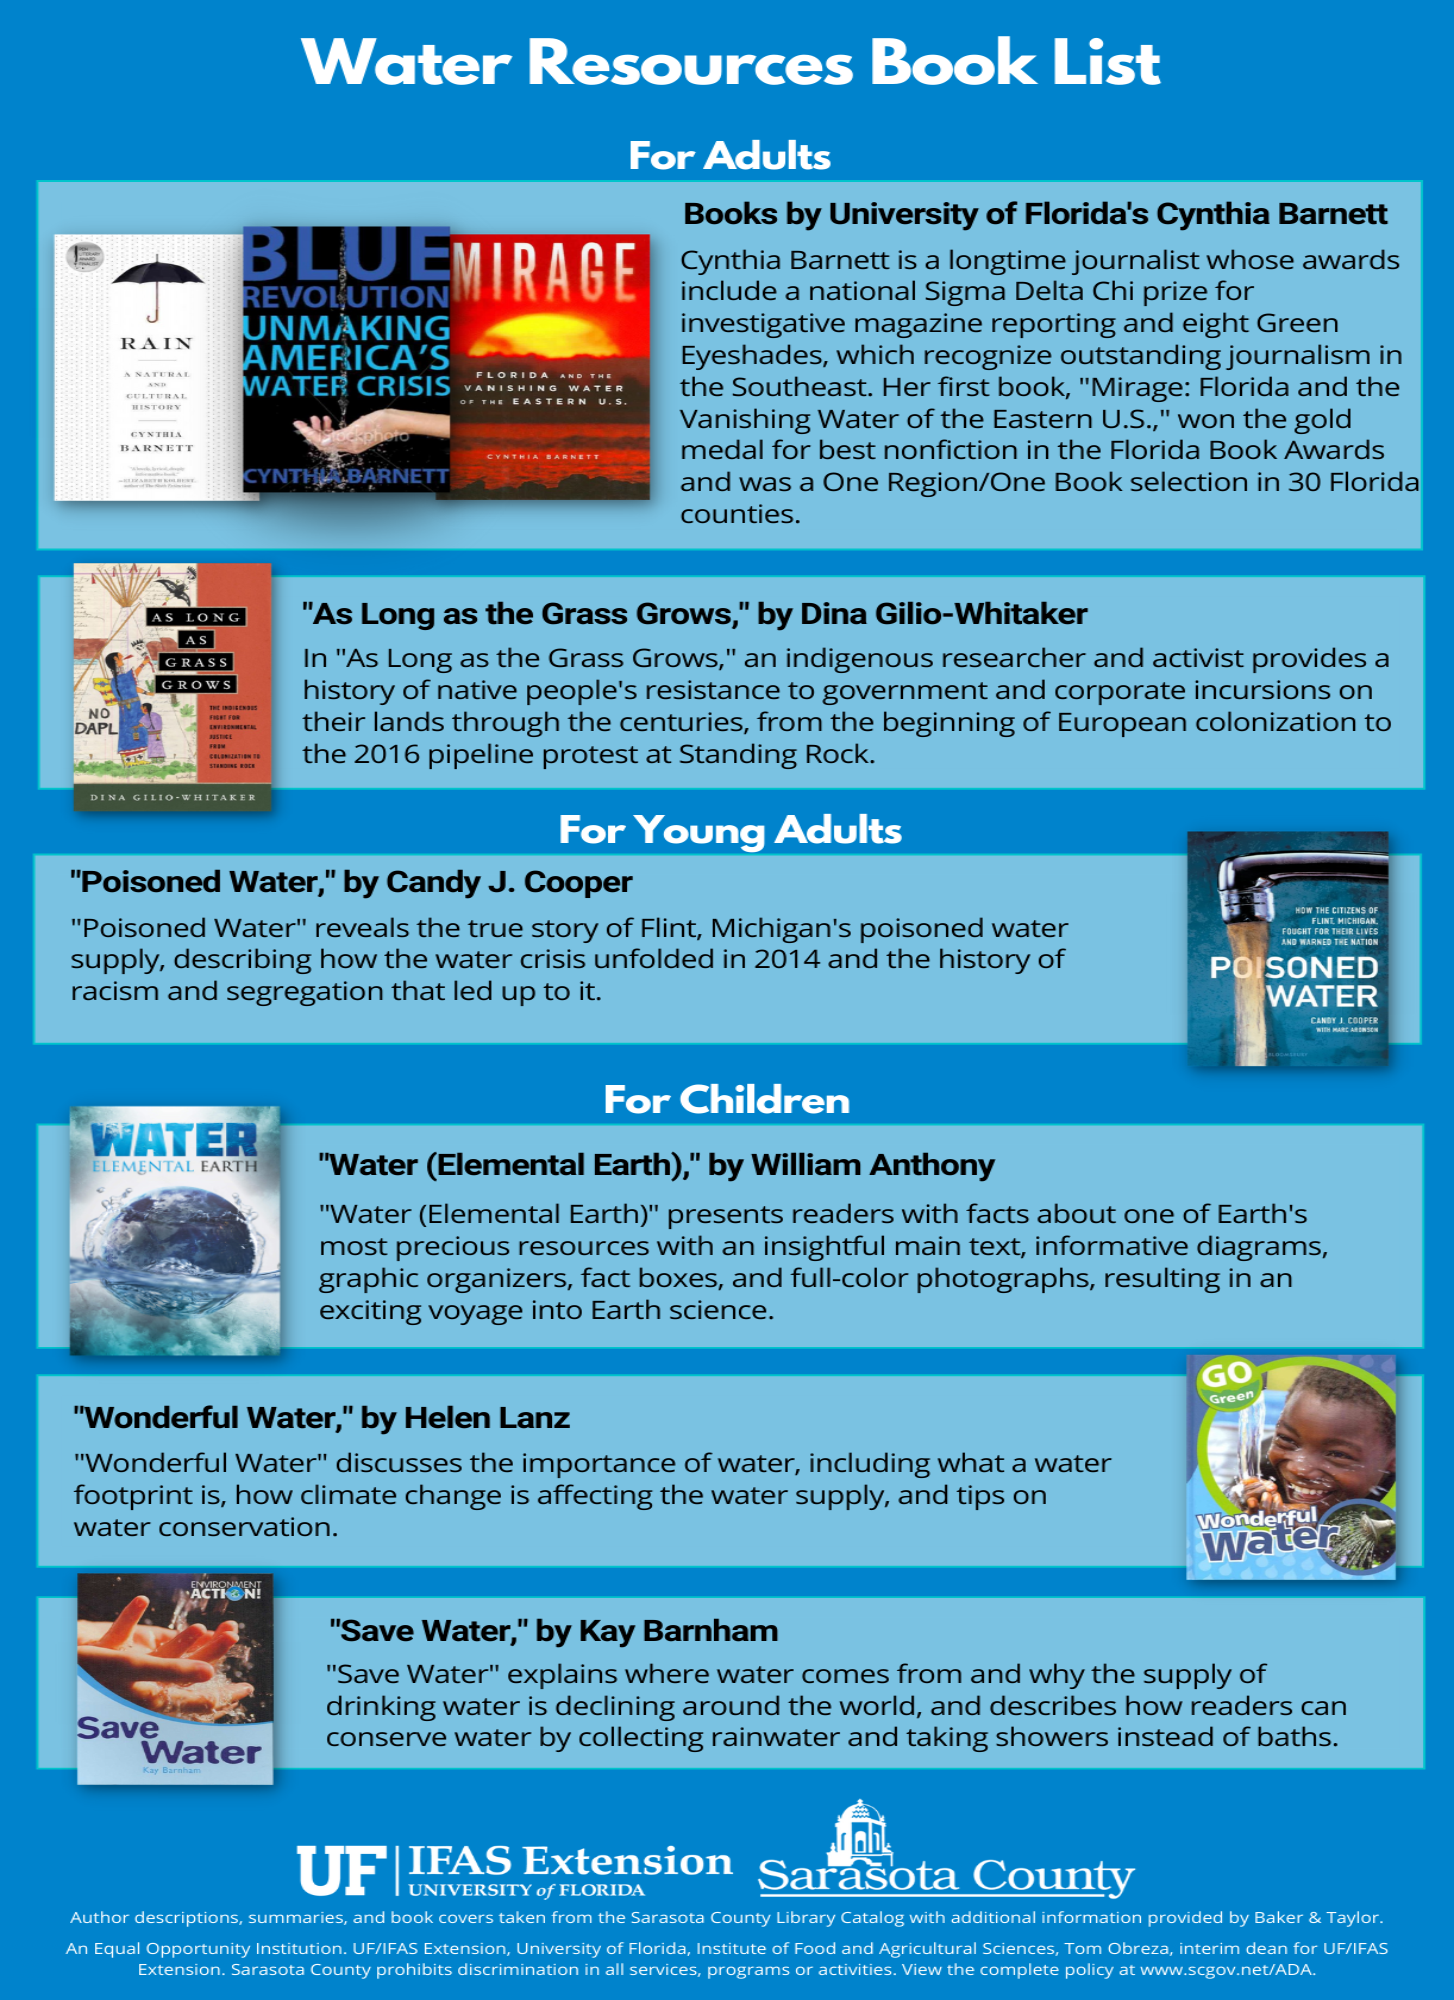 A list of water-themed books available at libraries at Sarasota County